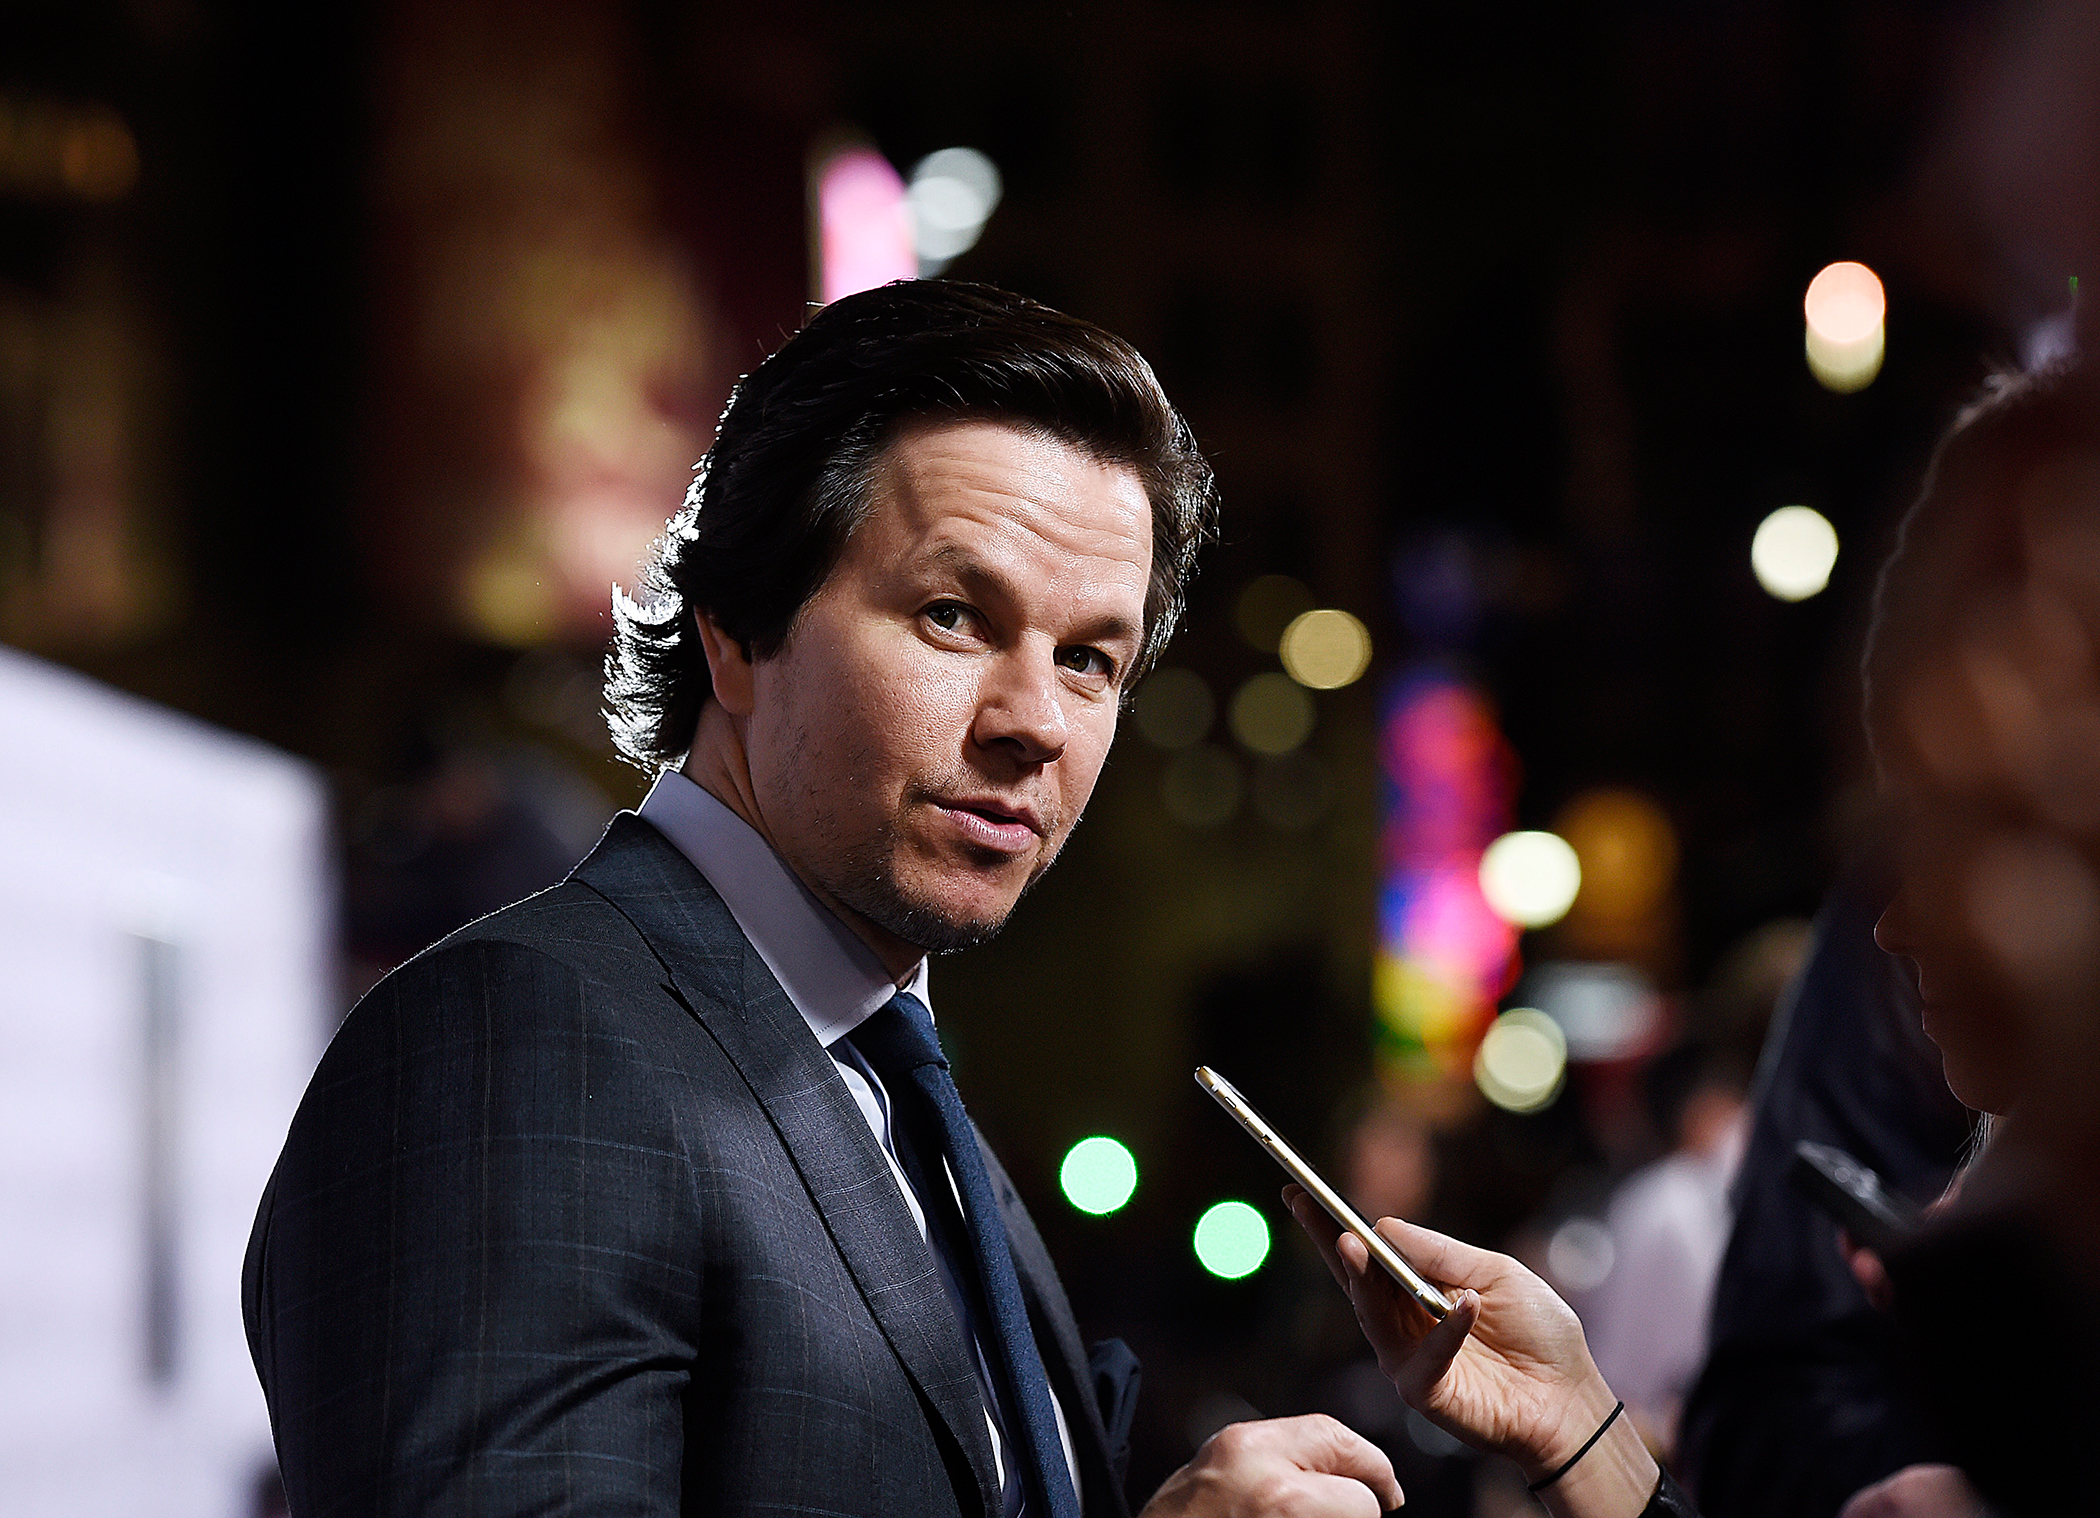 Mark Wahlberg during the premiere of  The Gambler  in Los Angeles, California November 10, 2014.